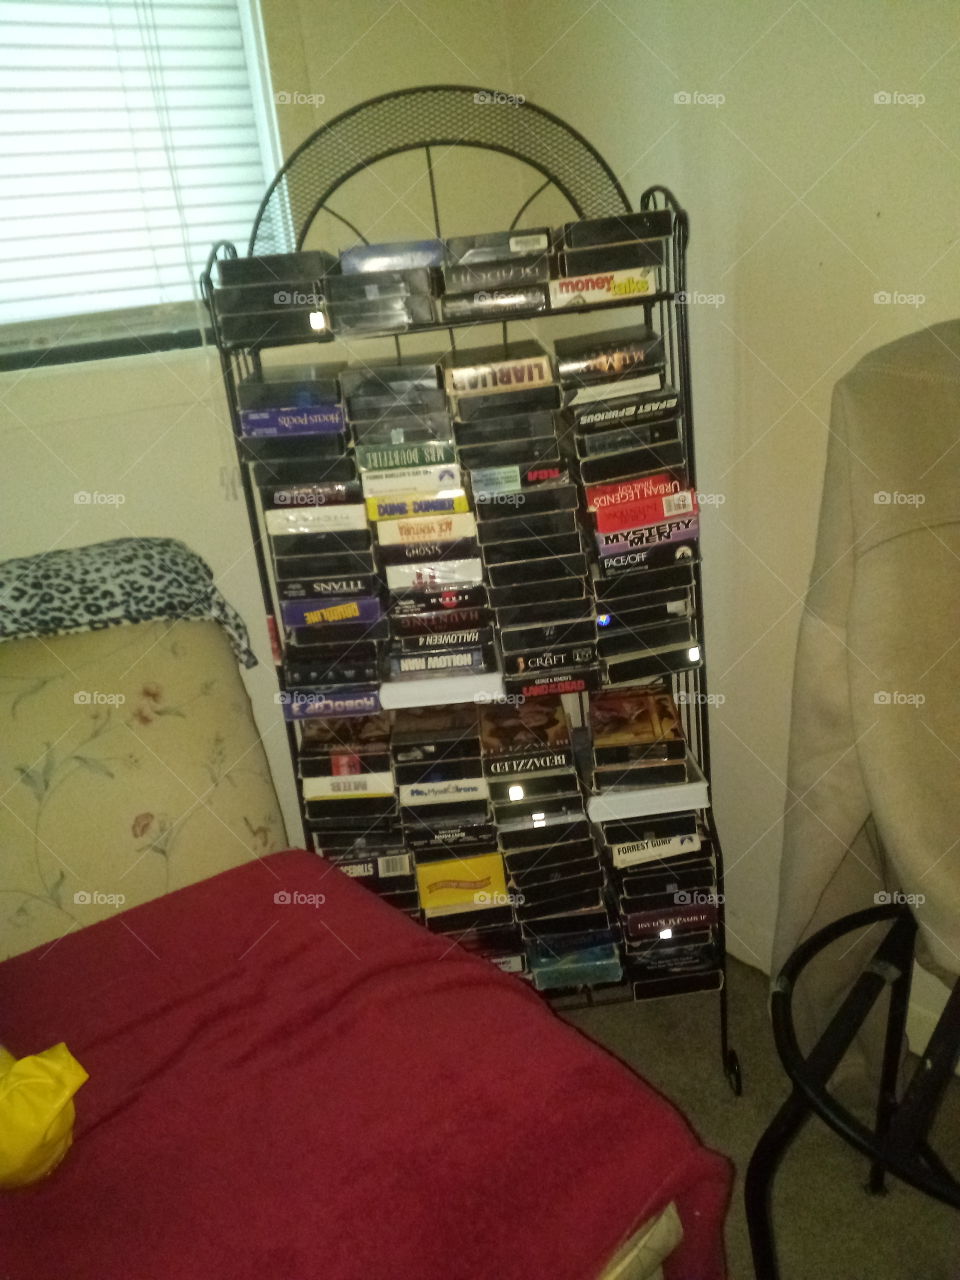 further away of my VHS tapes that are alot neater than the pic I published a few days ago